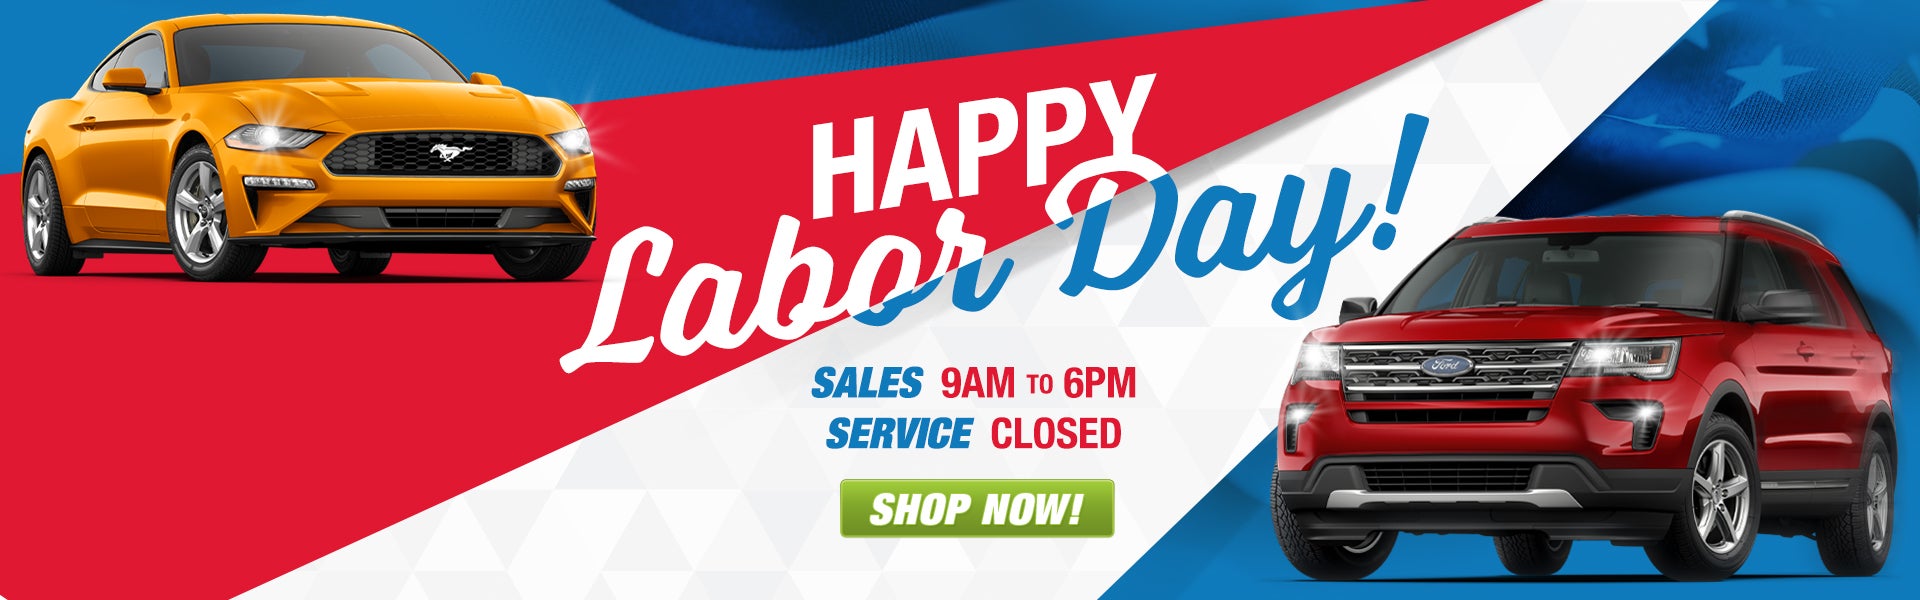 Does Labor Day Have Good Car Sales Car Sale and Rentals